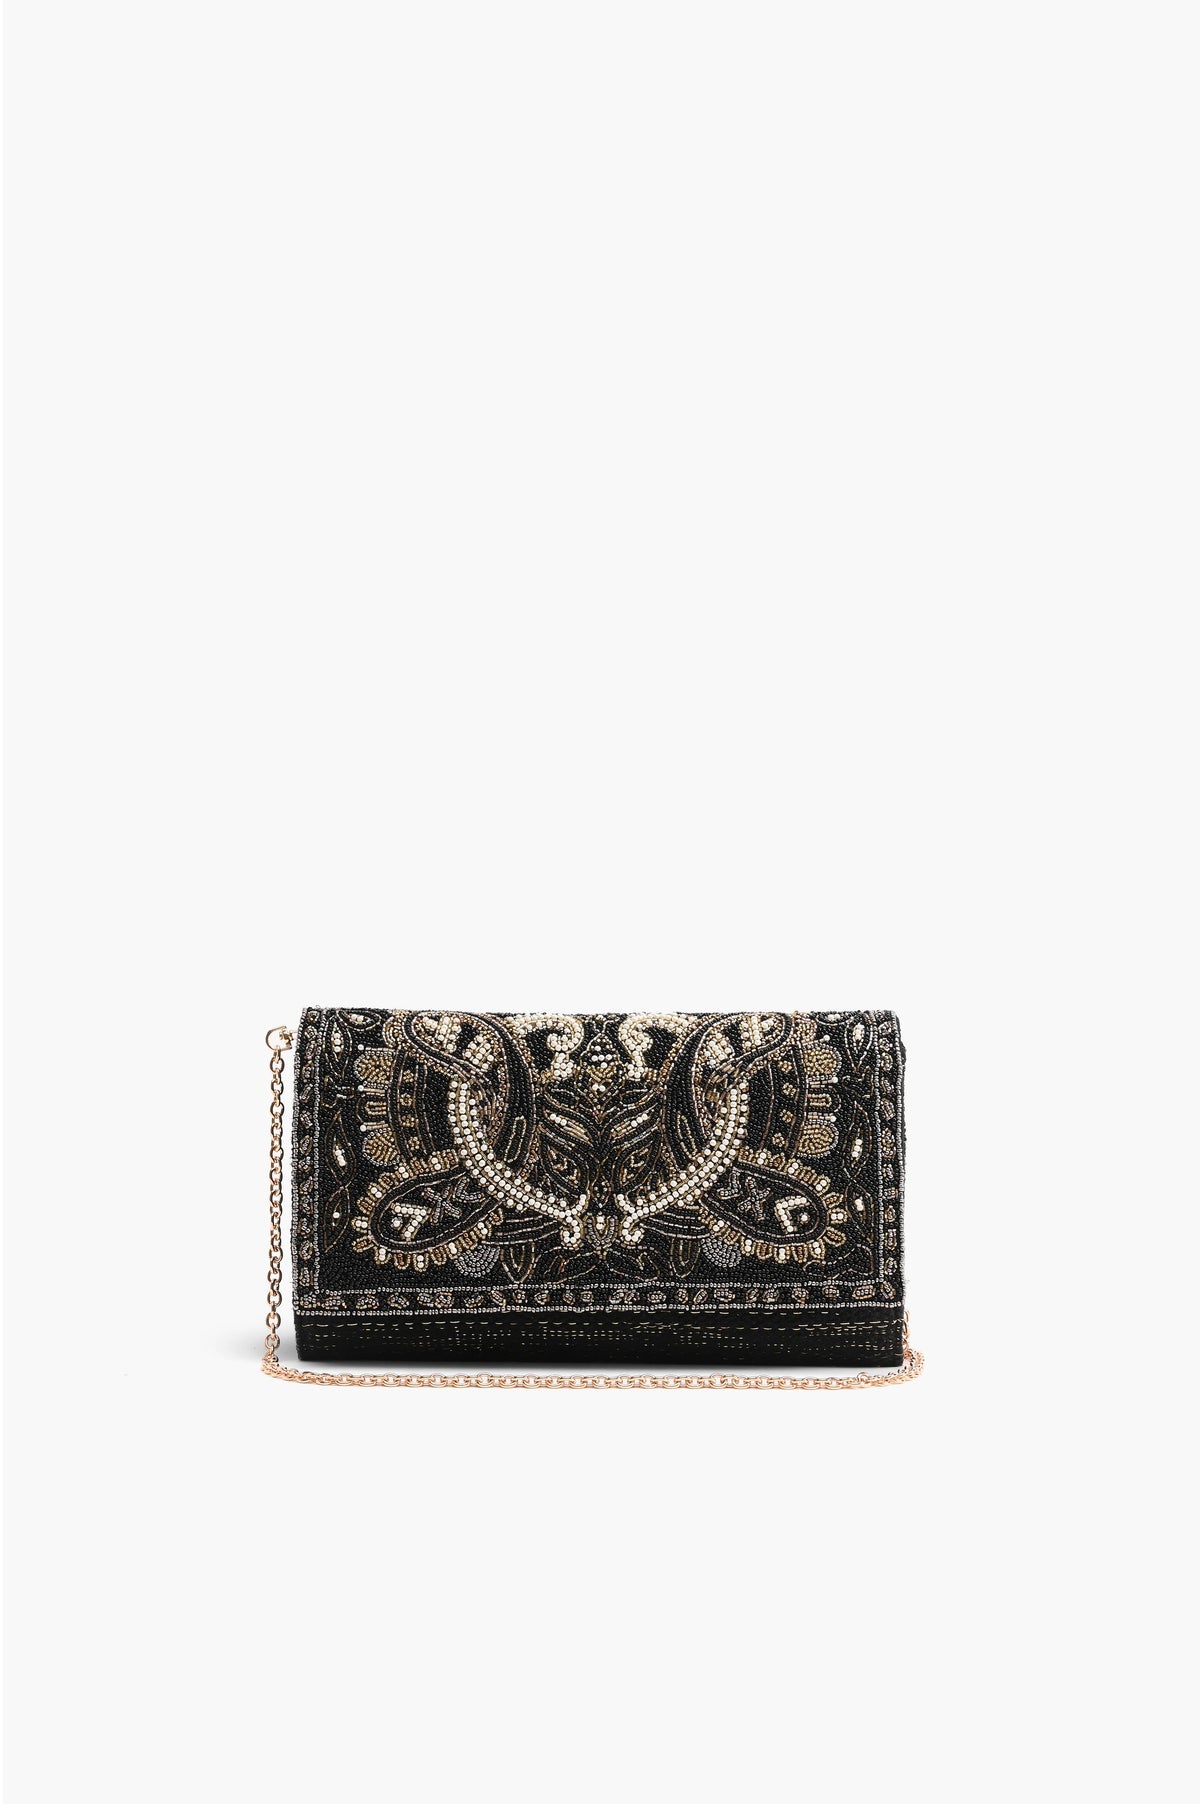 Old World Crafted Flap Clutch | America and Beyond